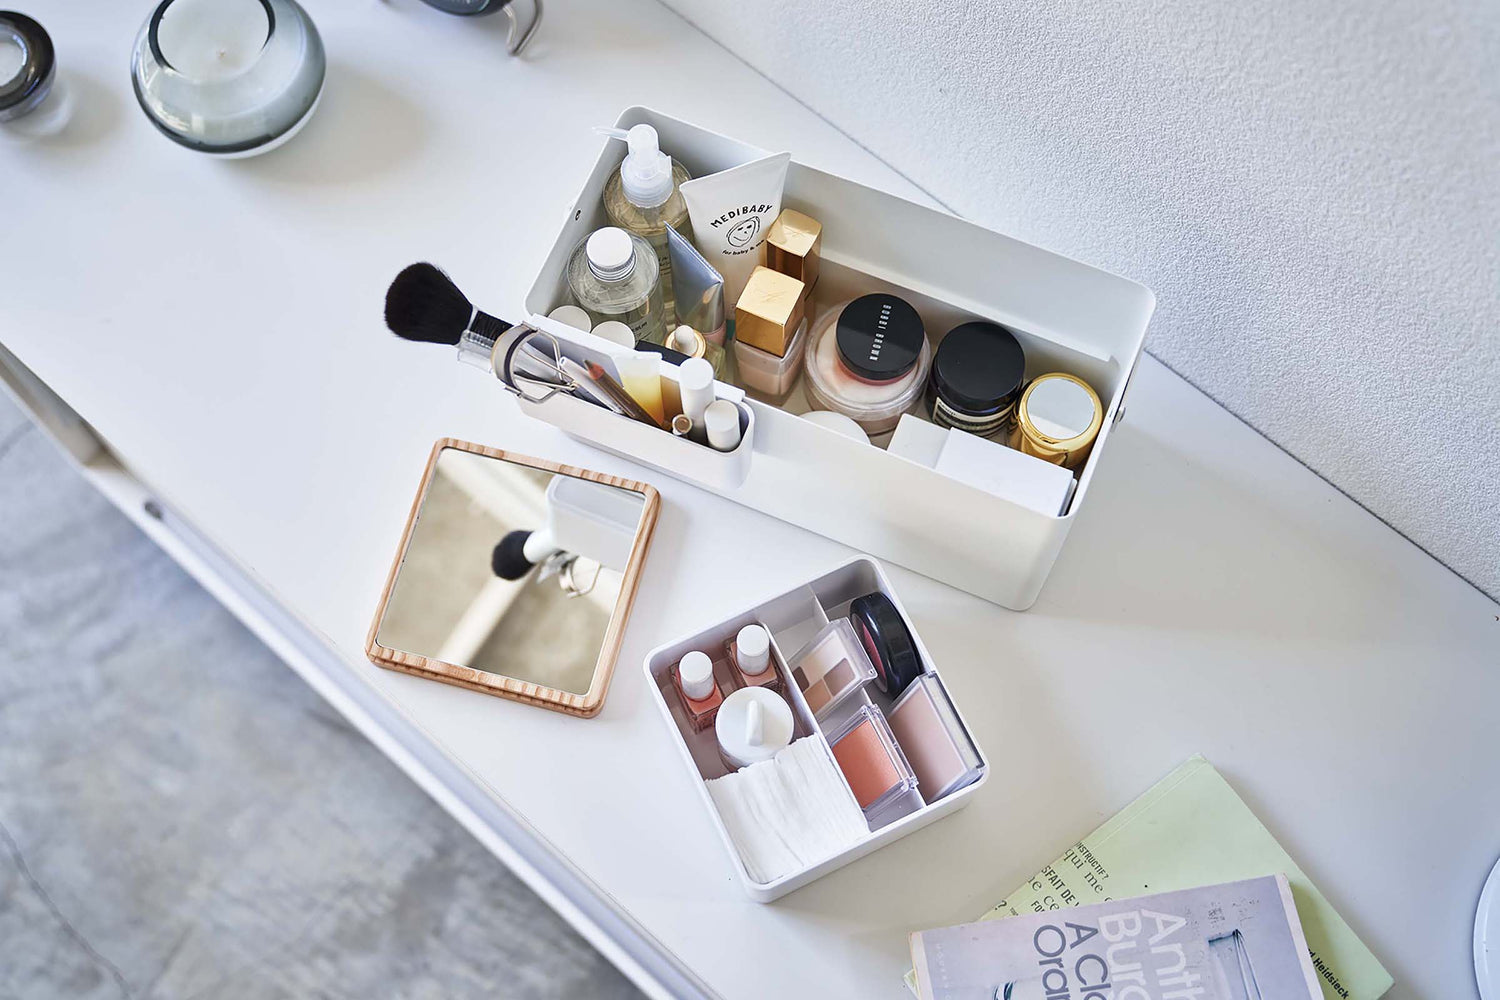 View 5 - Aerial view of open white Makeup Organizer and comparments holding makeup products on table by Yamazaki Home.